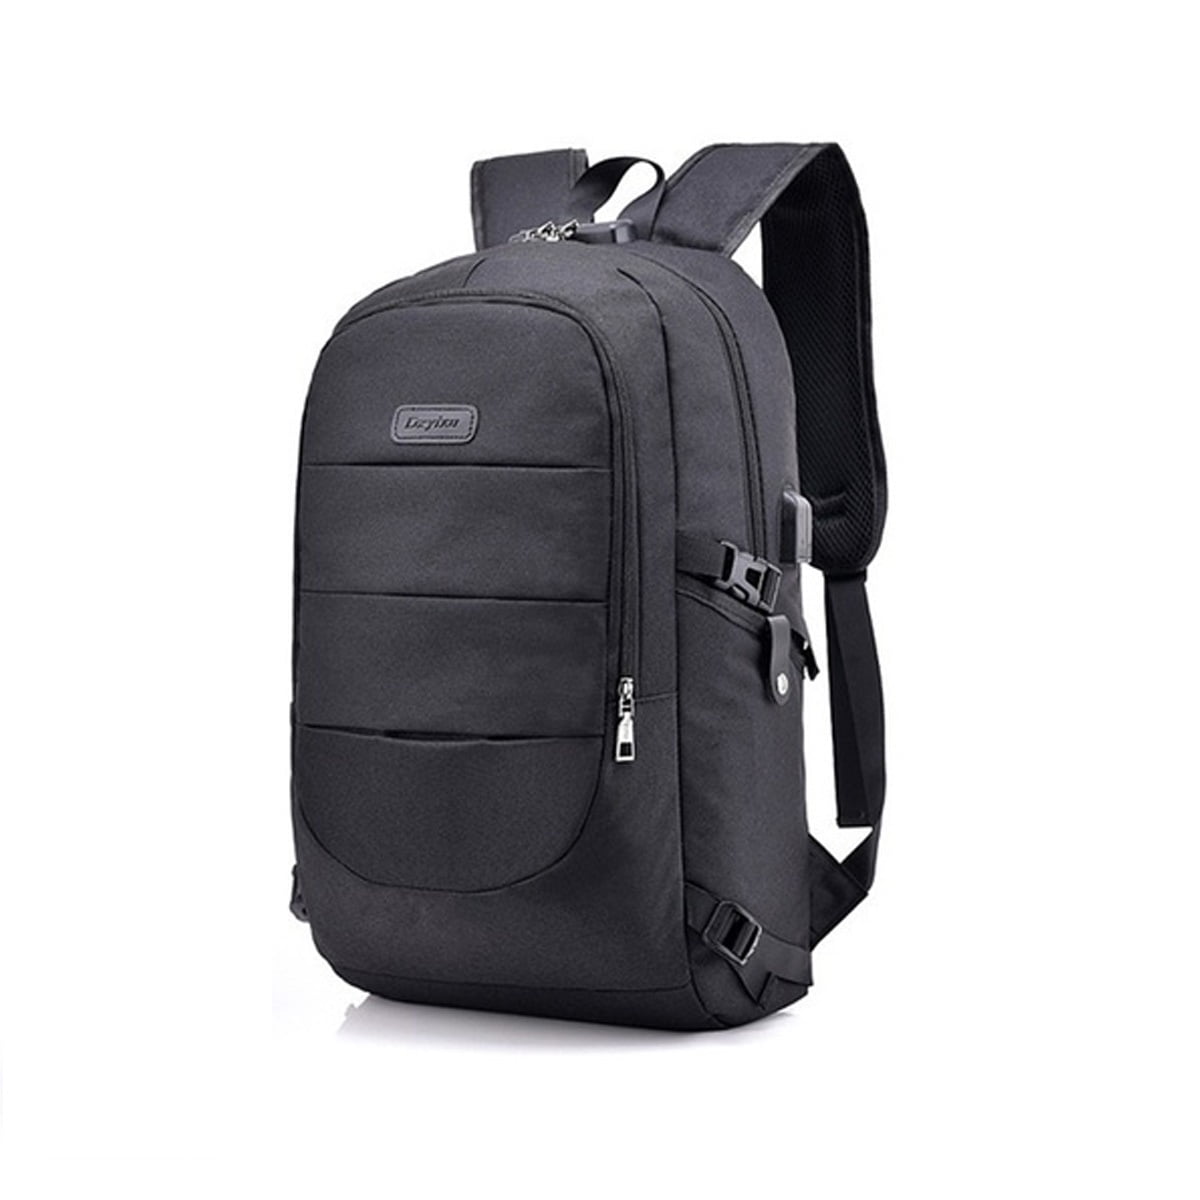 DQZ end Mens Business Travel Backpack,Water Resistant Anti-Theft Laptop Rucksack with USB Charging Port Men College Backpack Travel 